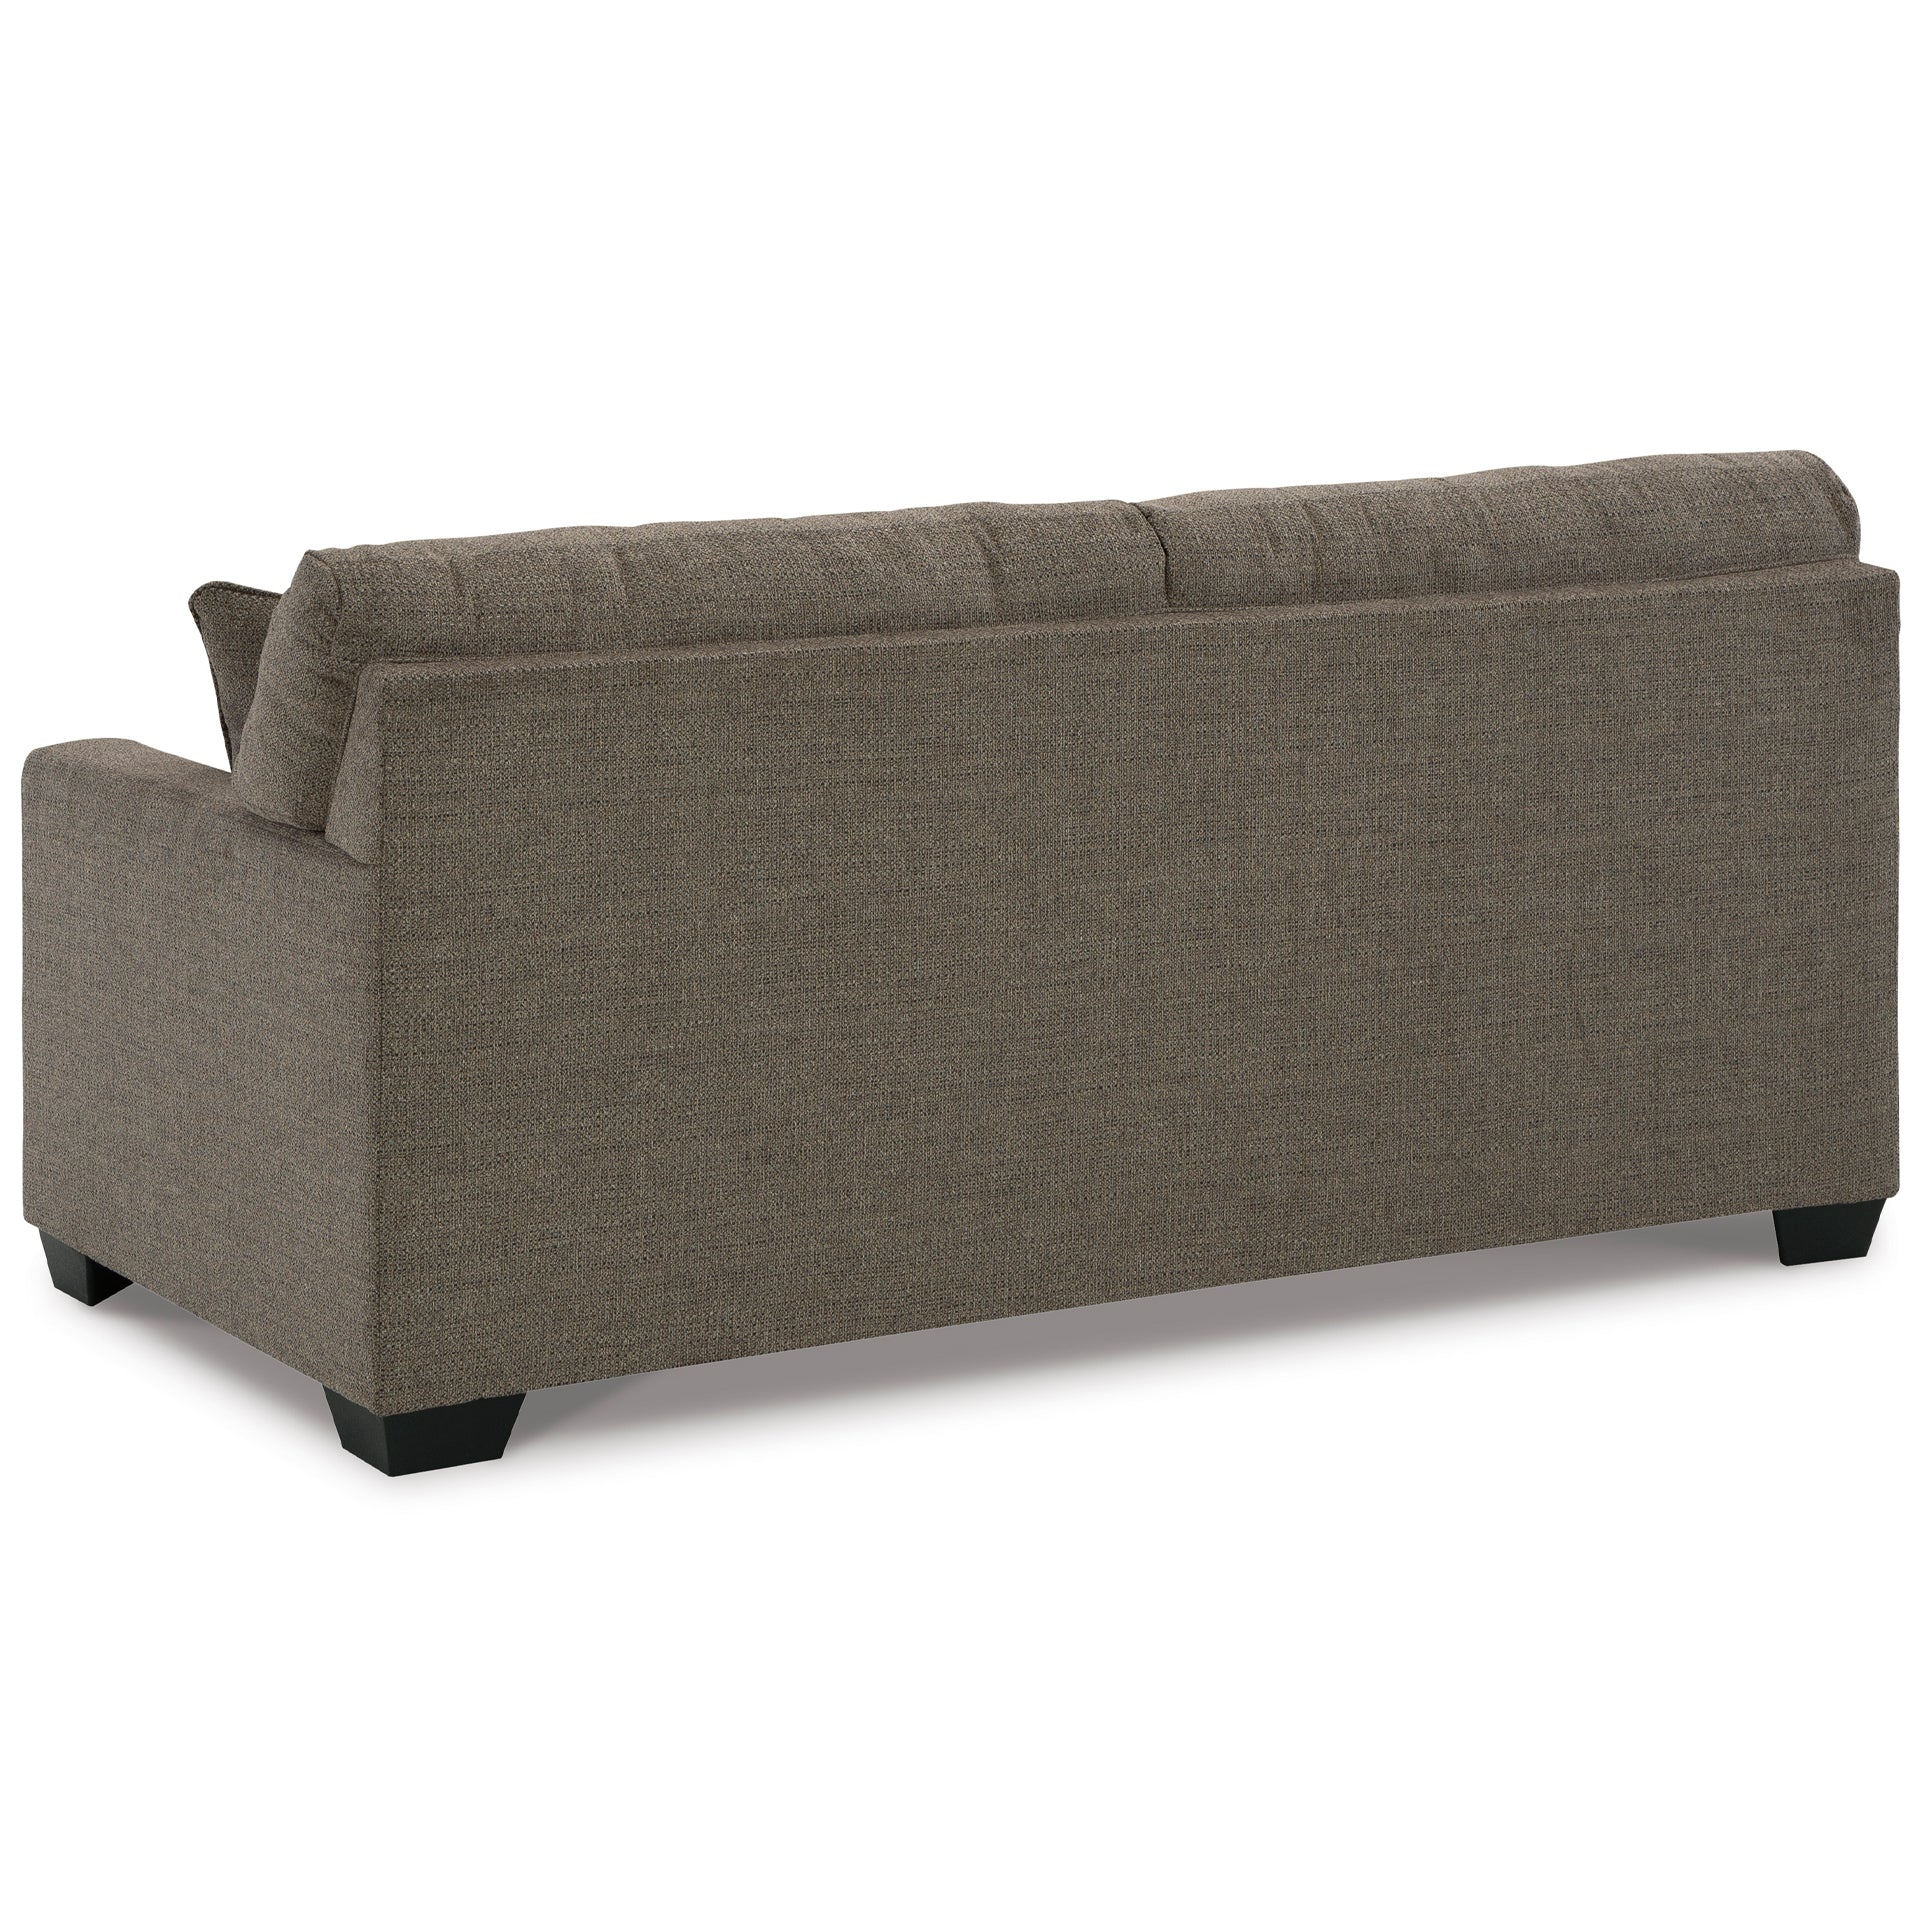 Sophisticated Mahoney Sofa in chocolate, a timeless choice for enhancing any room’s decor